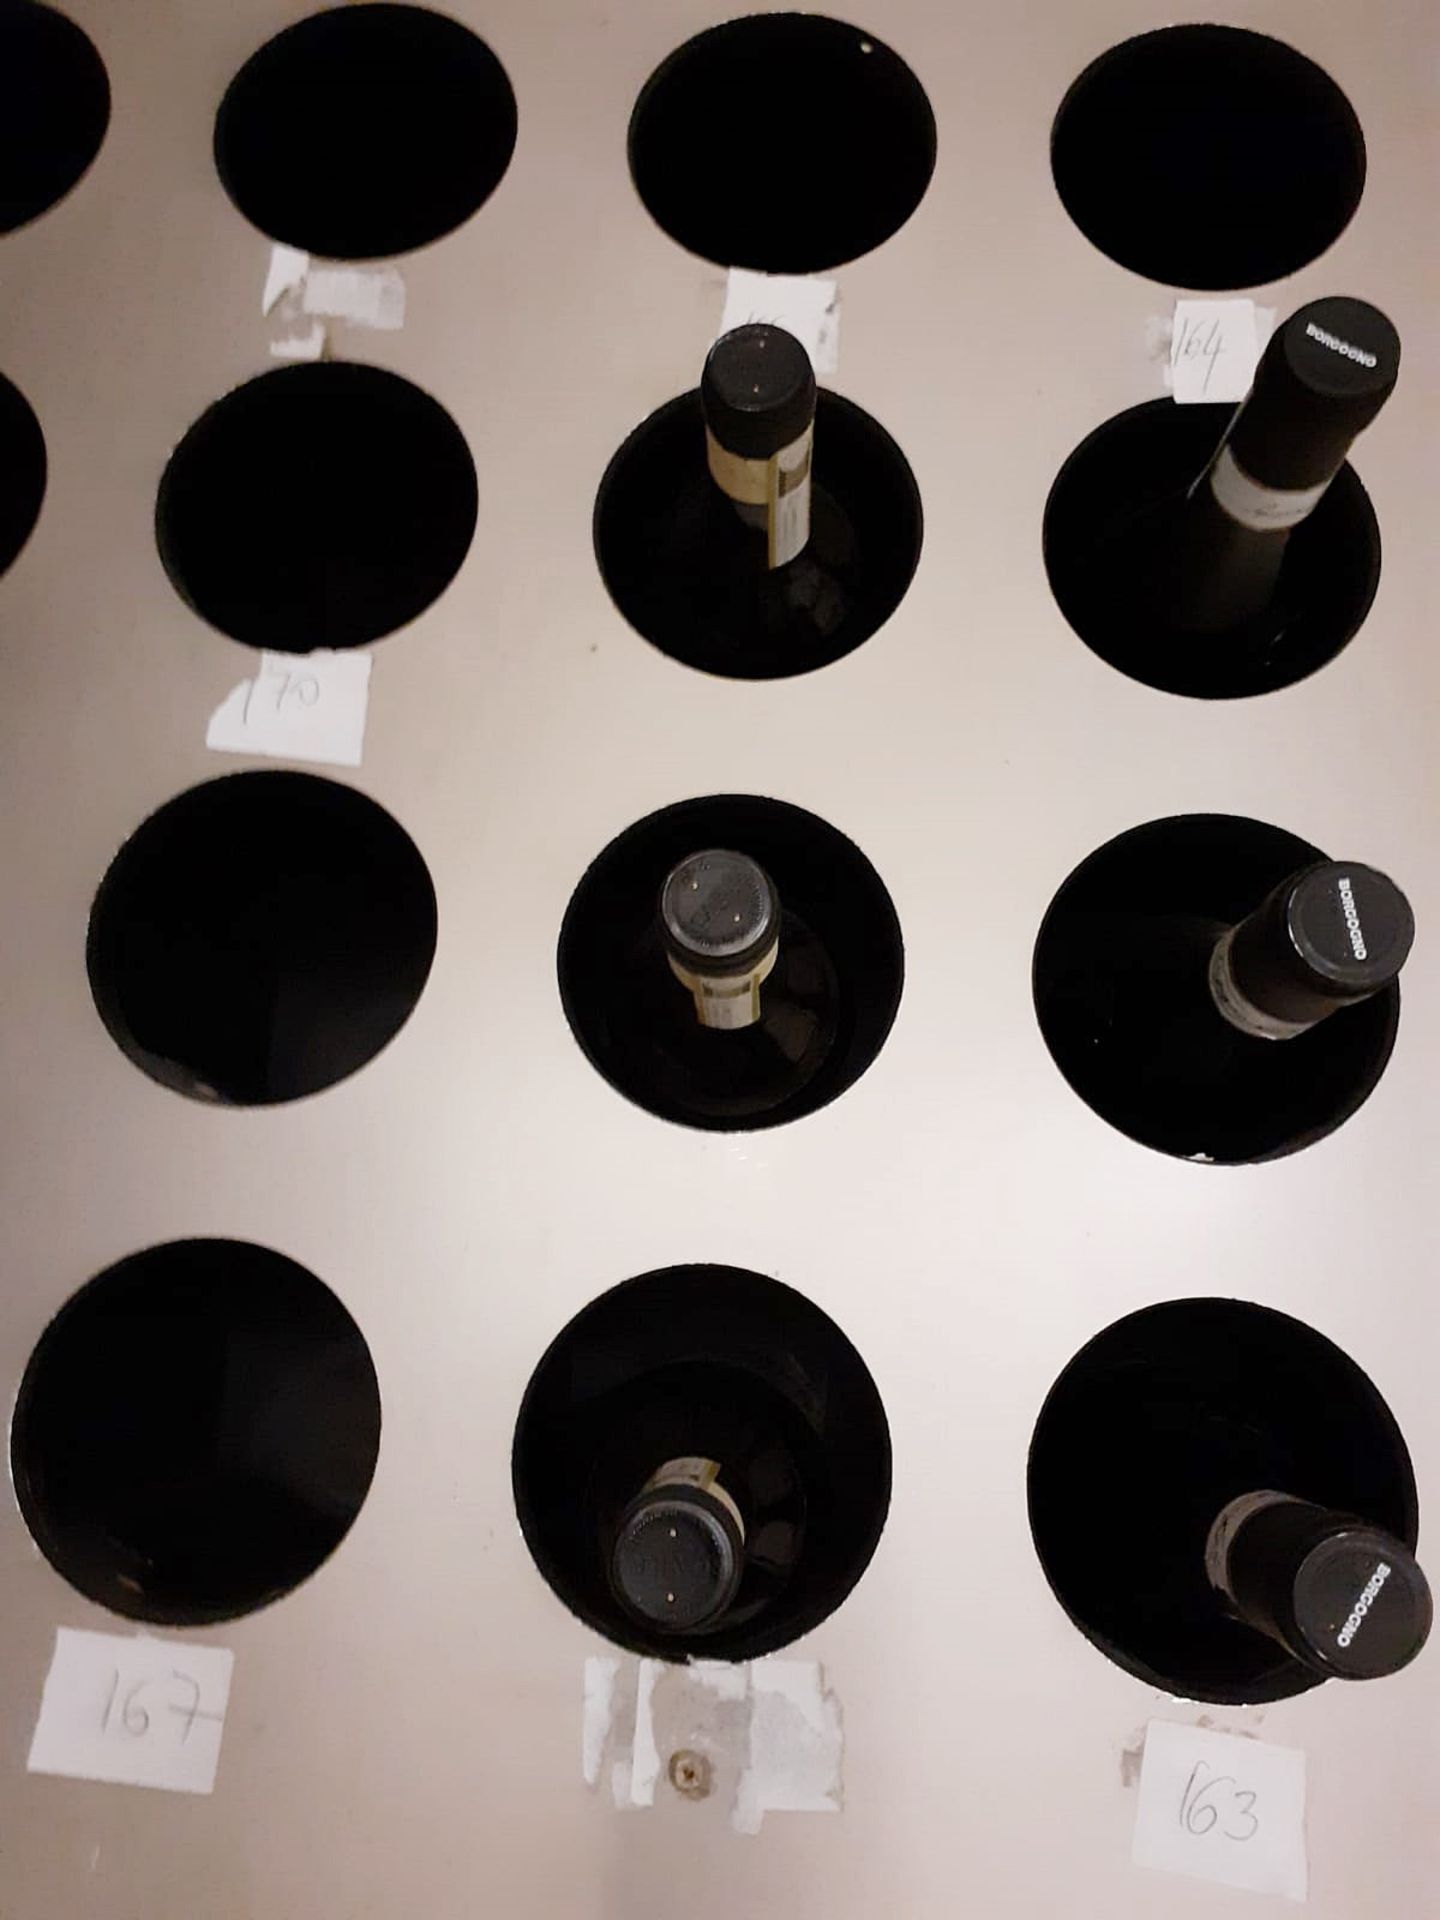 1 x Wall Mounted Wine Rack For 150 Bottles, Supplied In 4 Sections - Dimensions: W440cm x H84cm x - Image 3 of 4